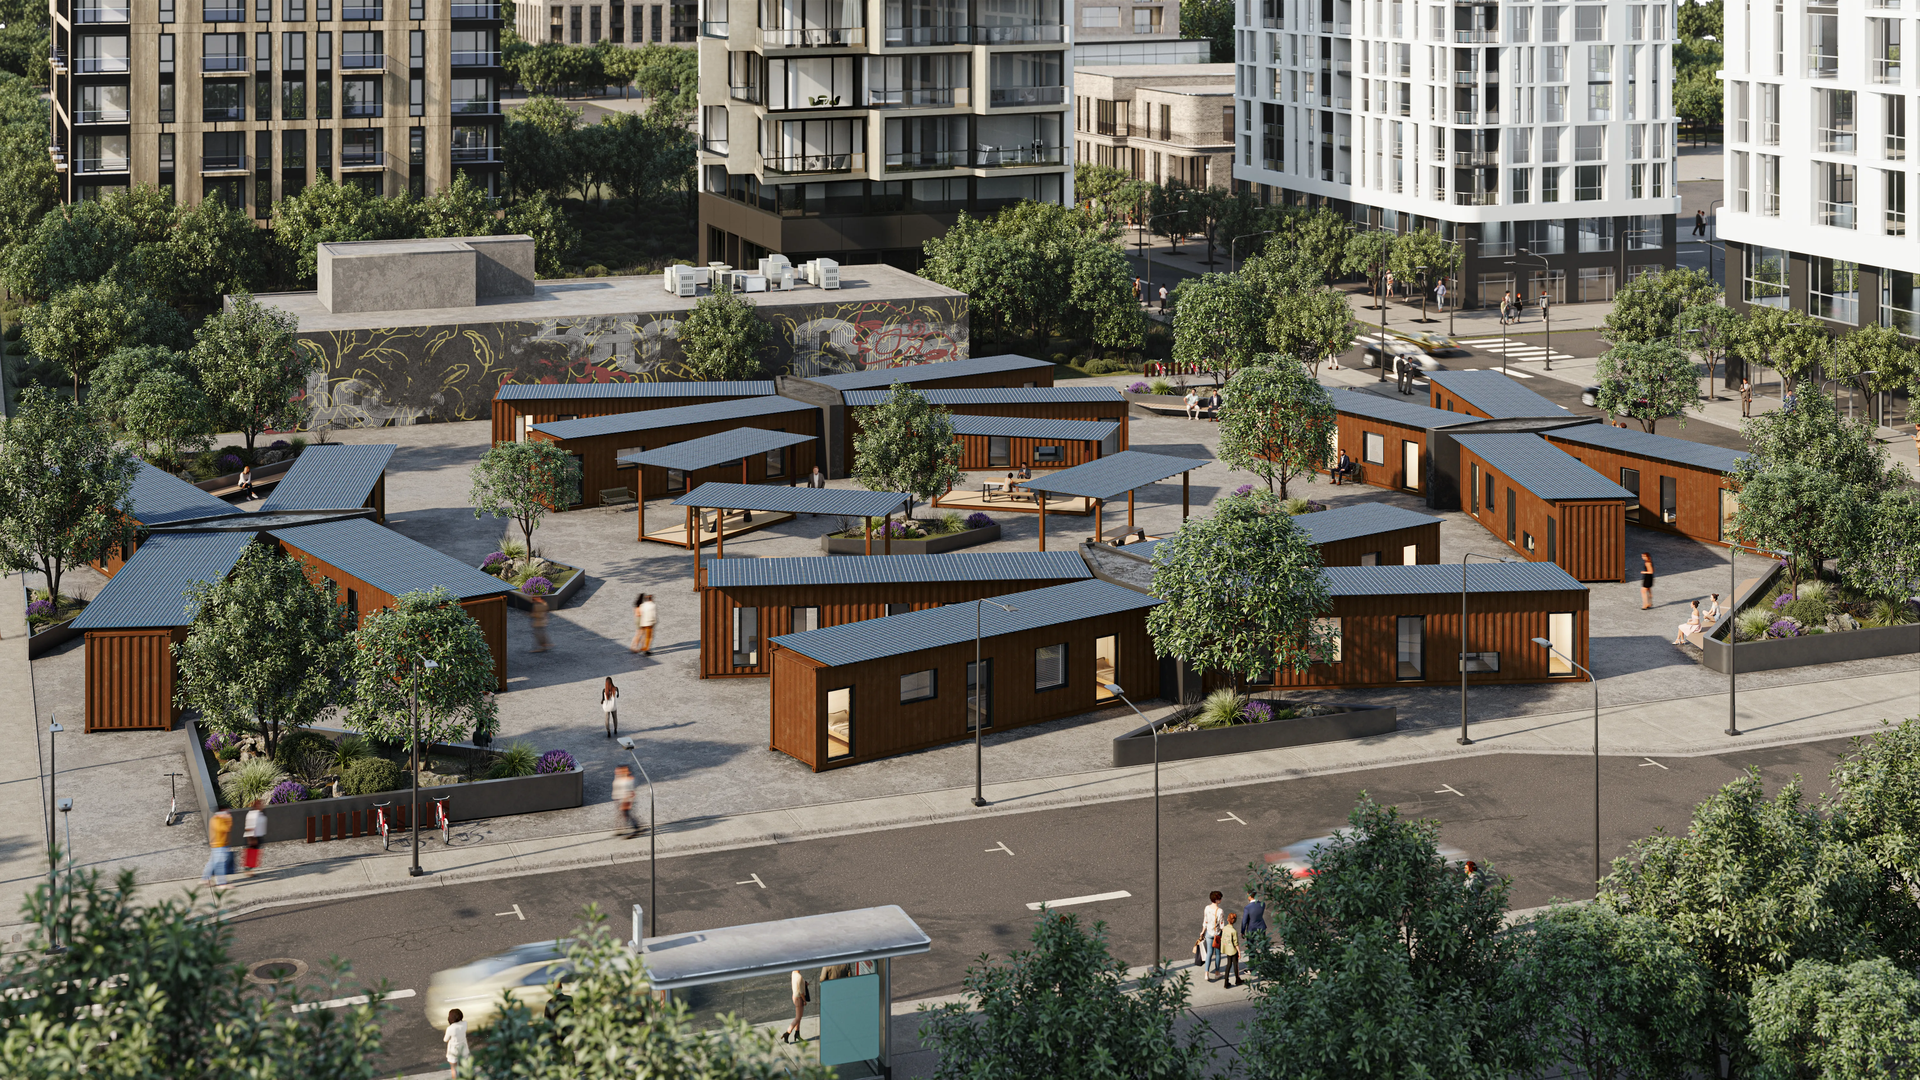 A rendering of shipping containers turned into homeless shelters.